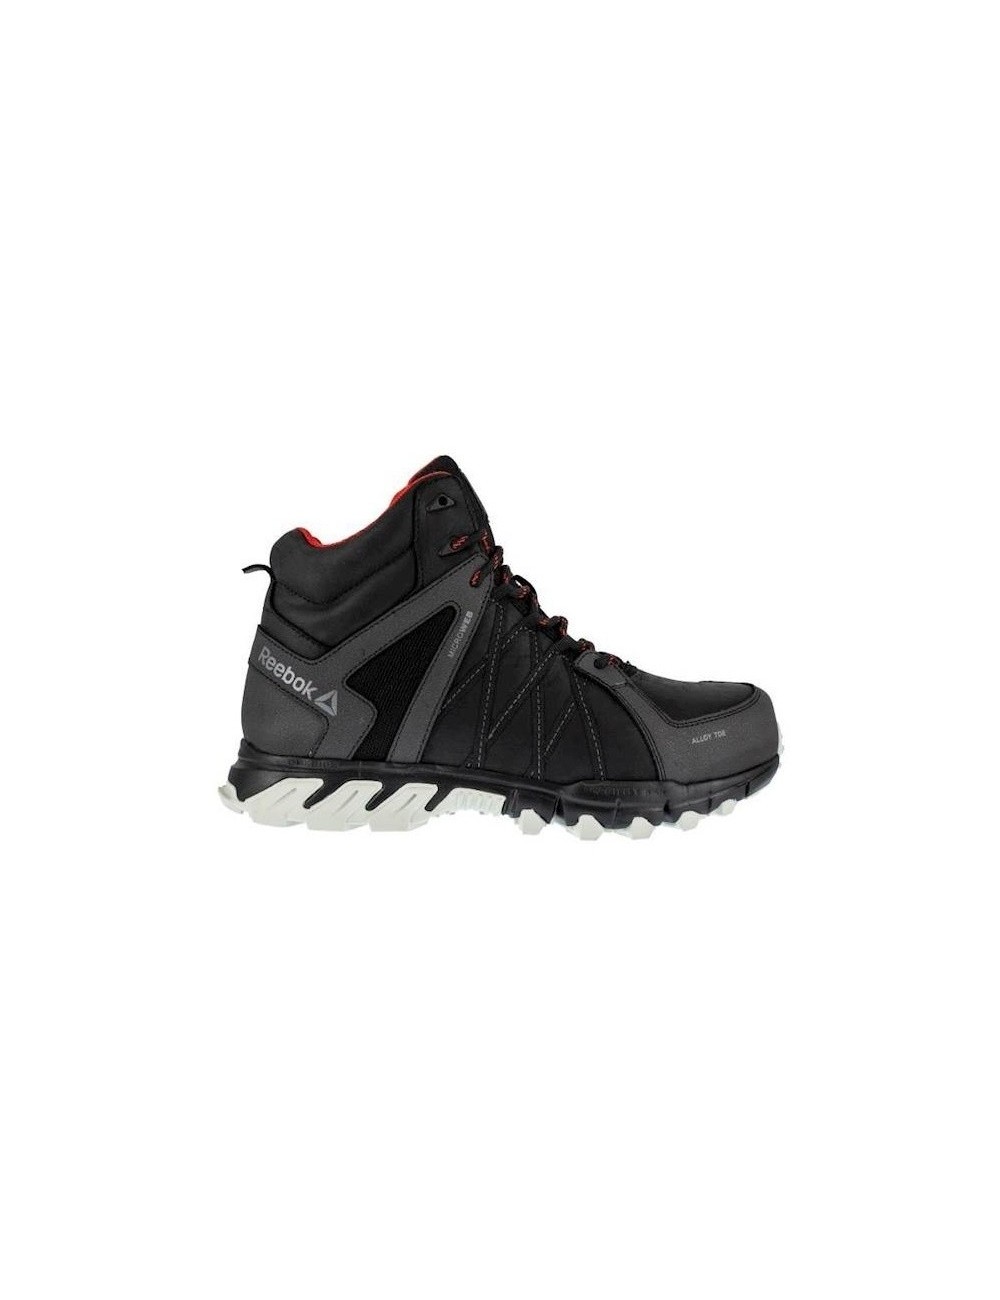 Reebok Trailgrip S3 work ankle boots